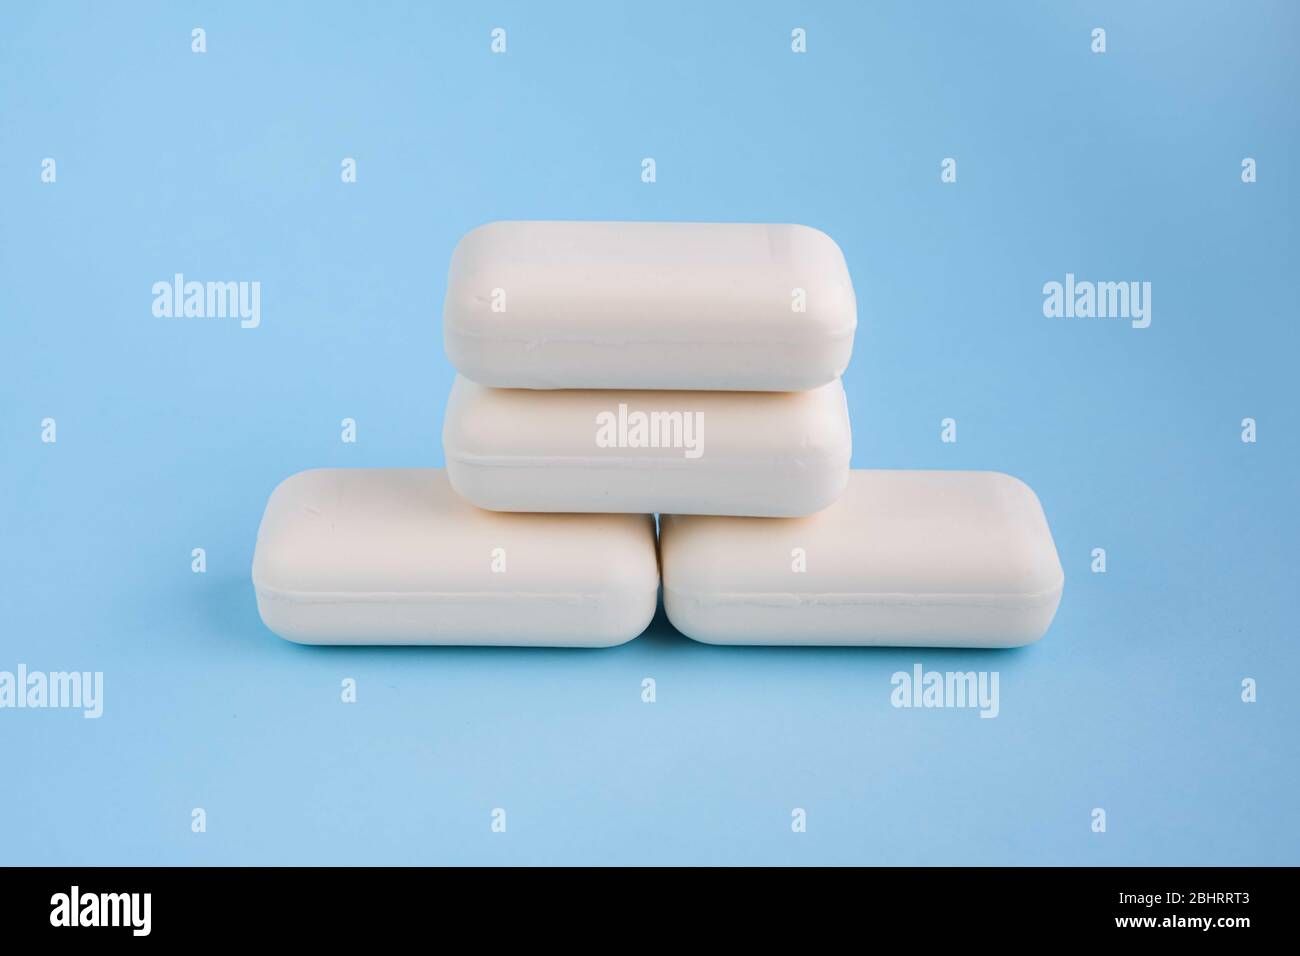 Bars of white soap on light blue background. Wash your hands concept. Stop bacteria or infection. Stock Photo